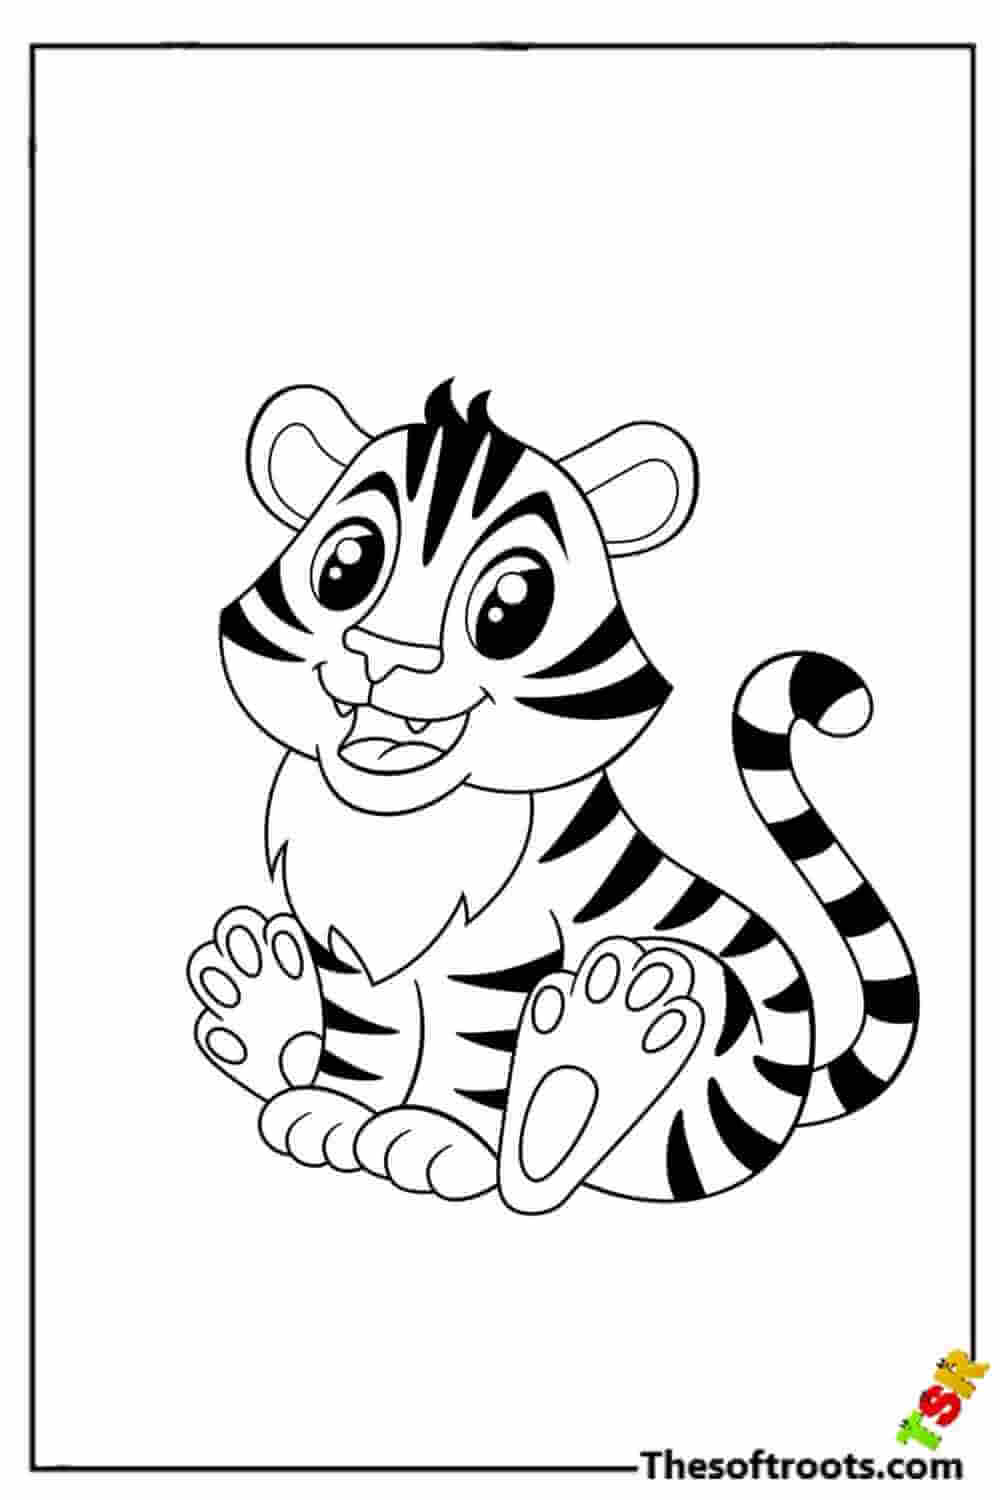 Funny Tiger coloring pages